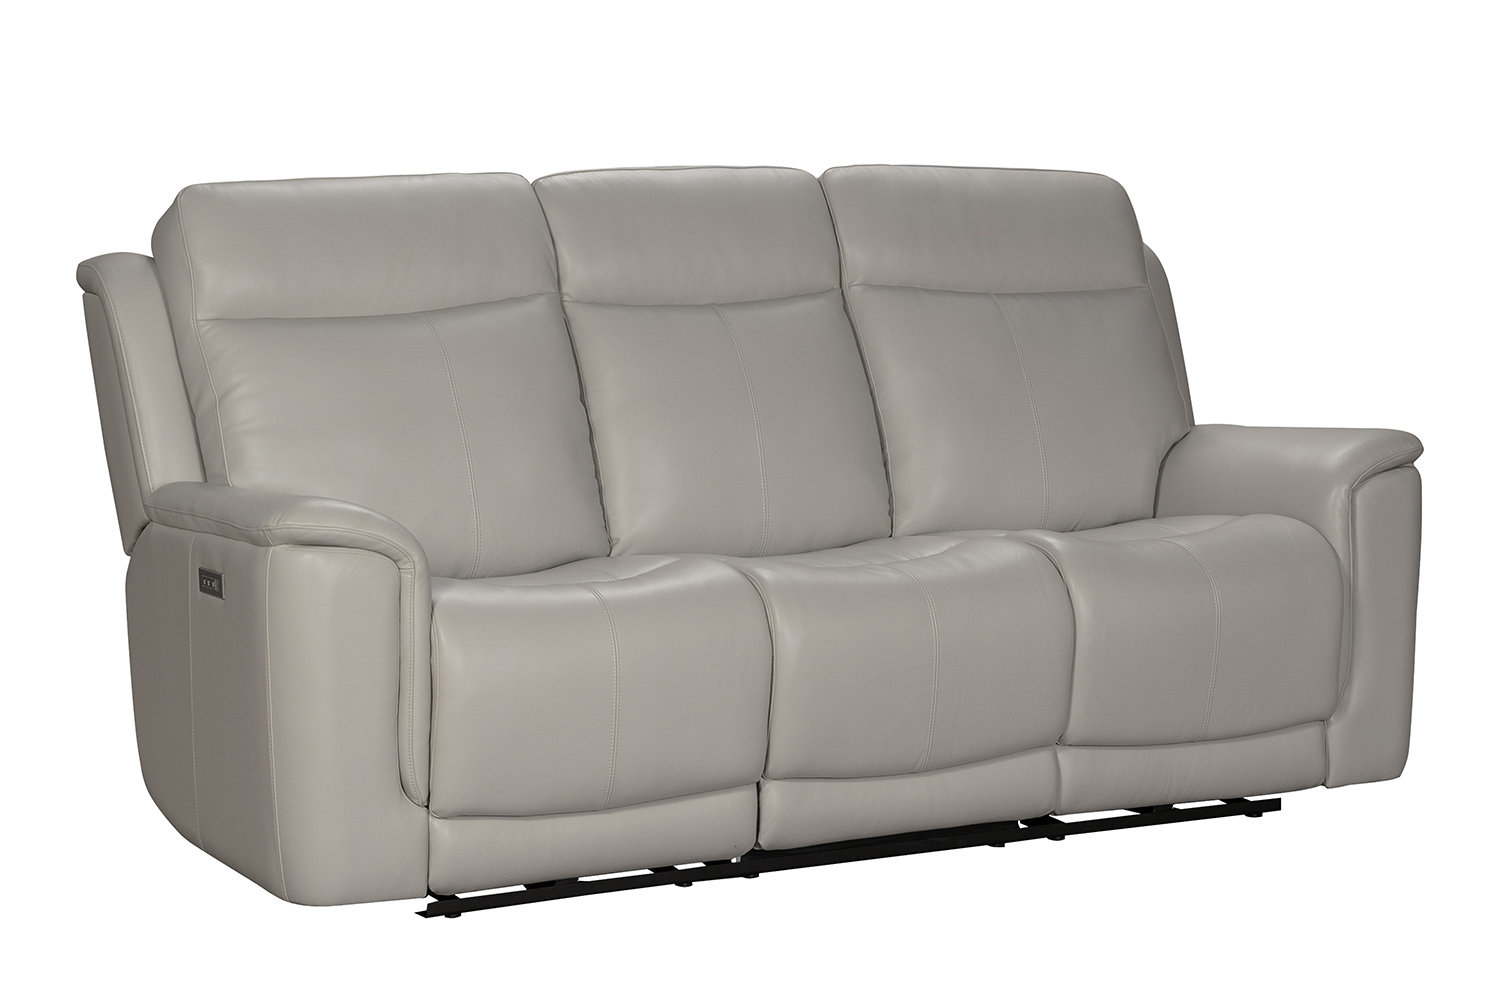 Barcalounger Burbank Power Reclining Sofa with Power Head Rests and Lumbar - Laurel Cream/Leather match